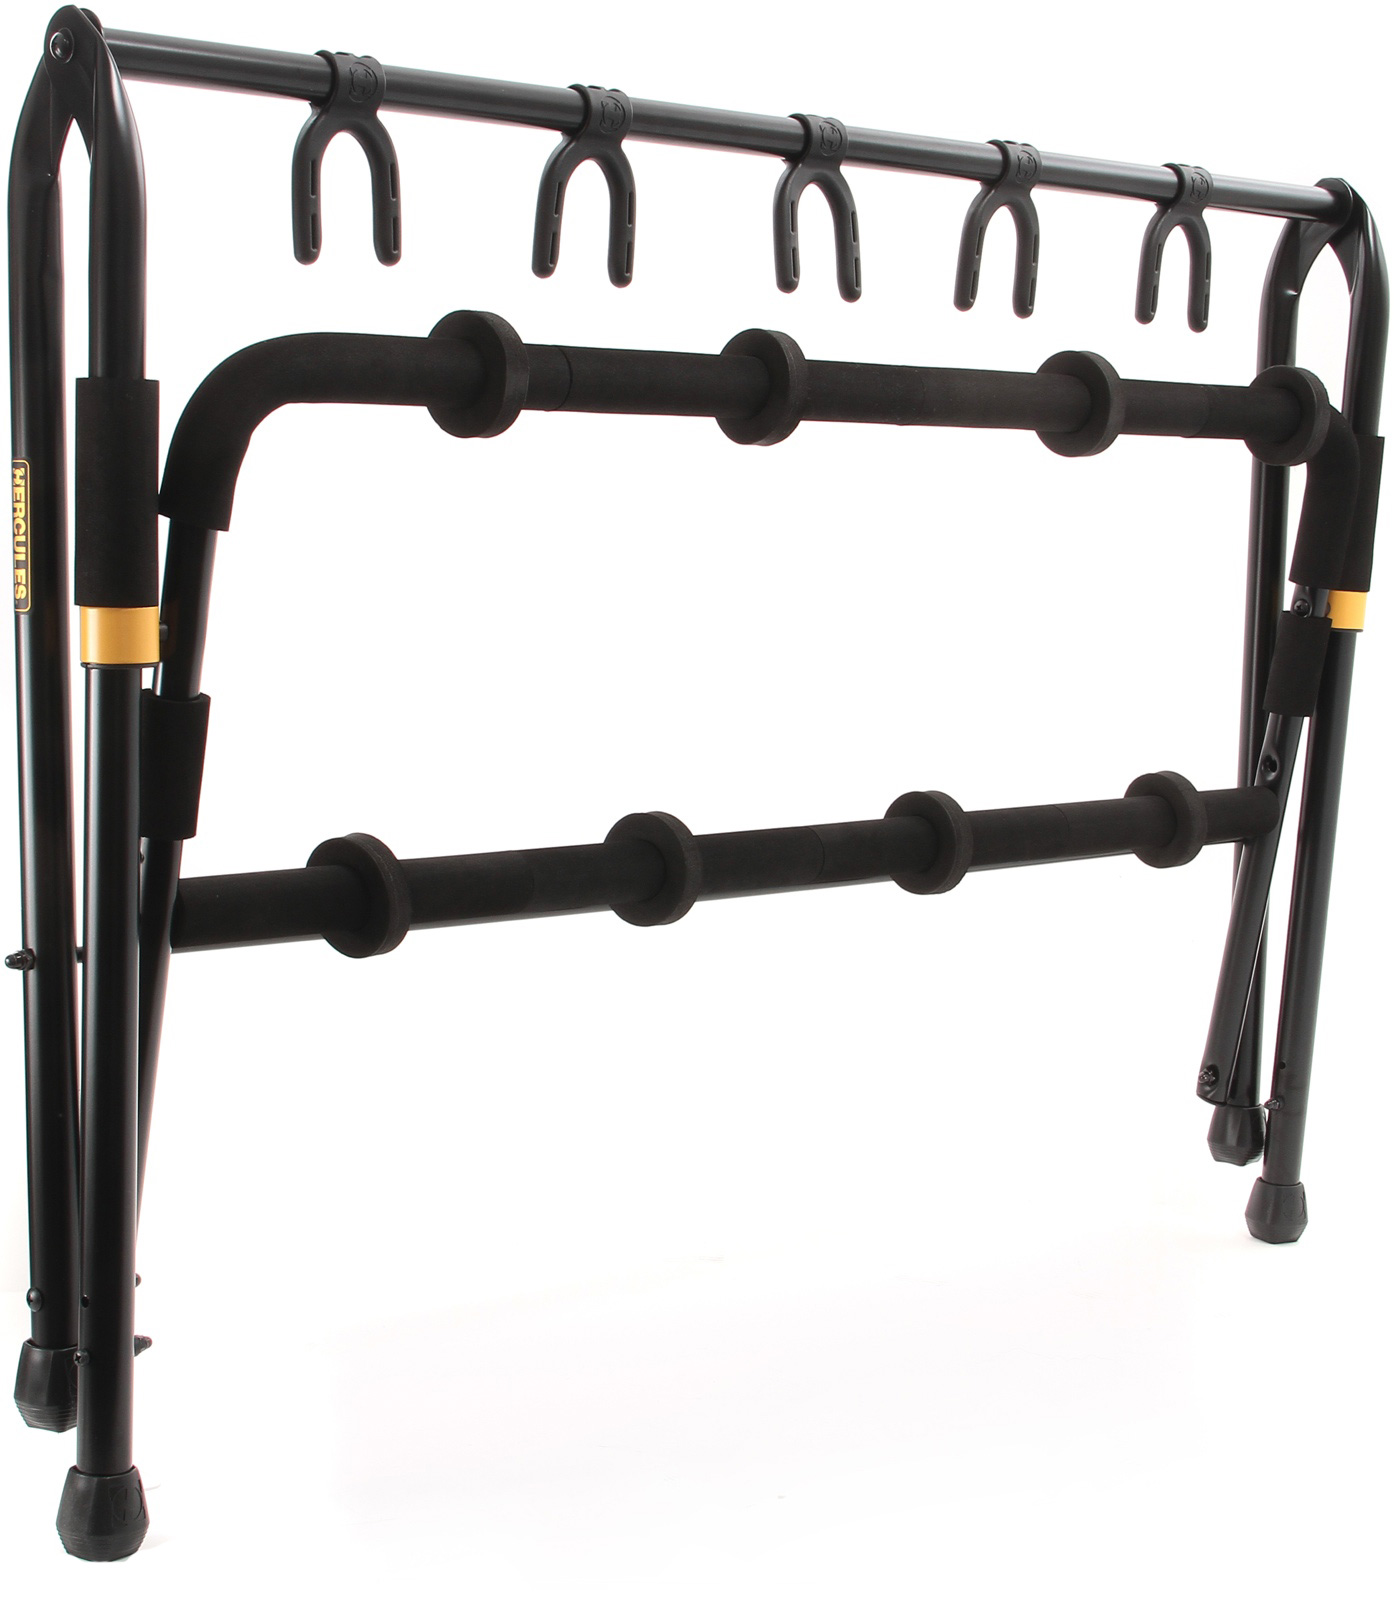 Hercules Stand Gs525b Floor Rack 5-guitars Stand - Stand for guitar & bass - Variation 4